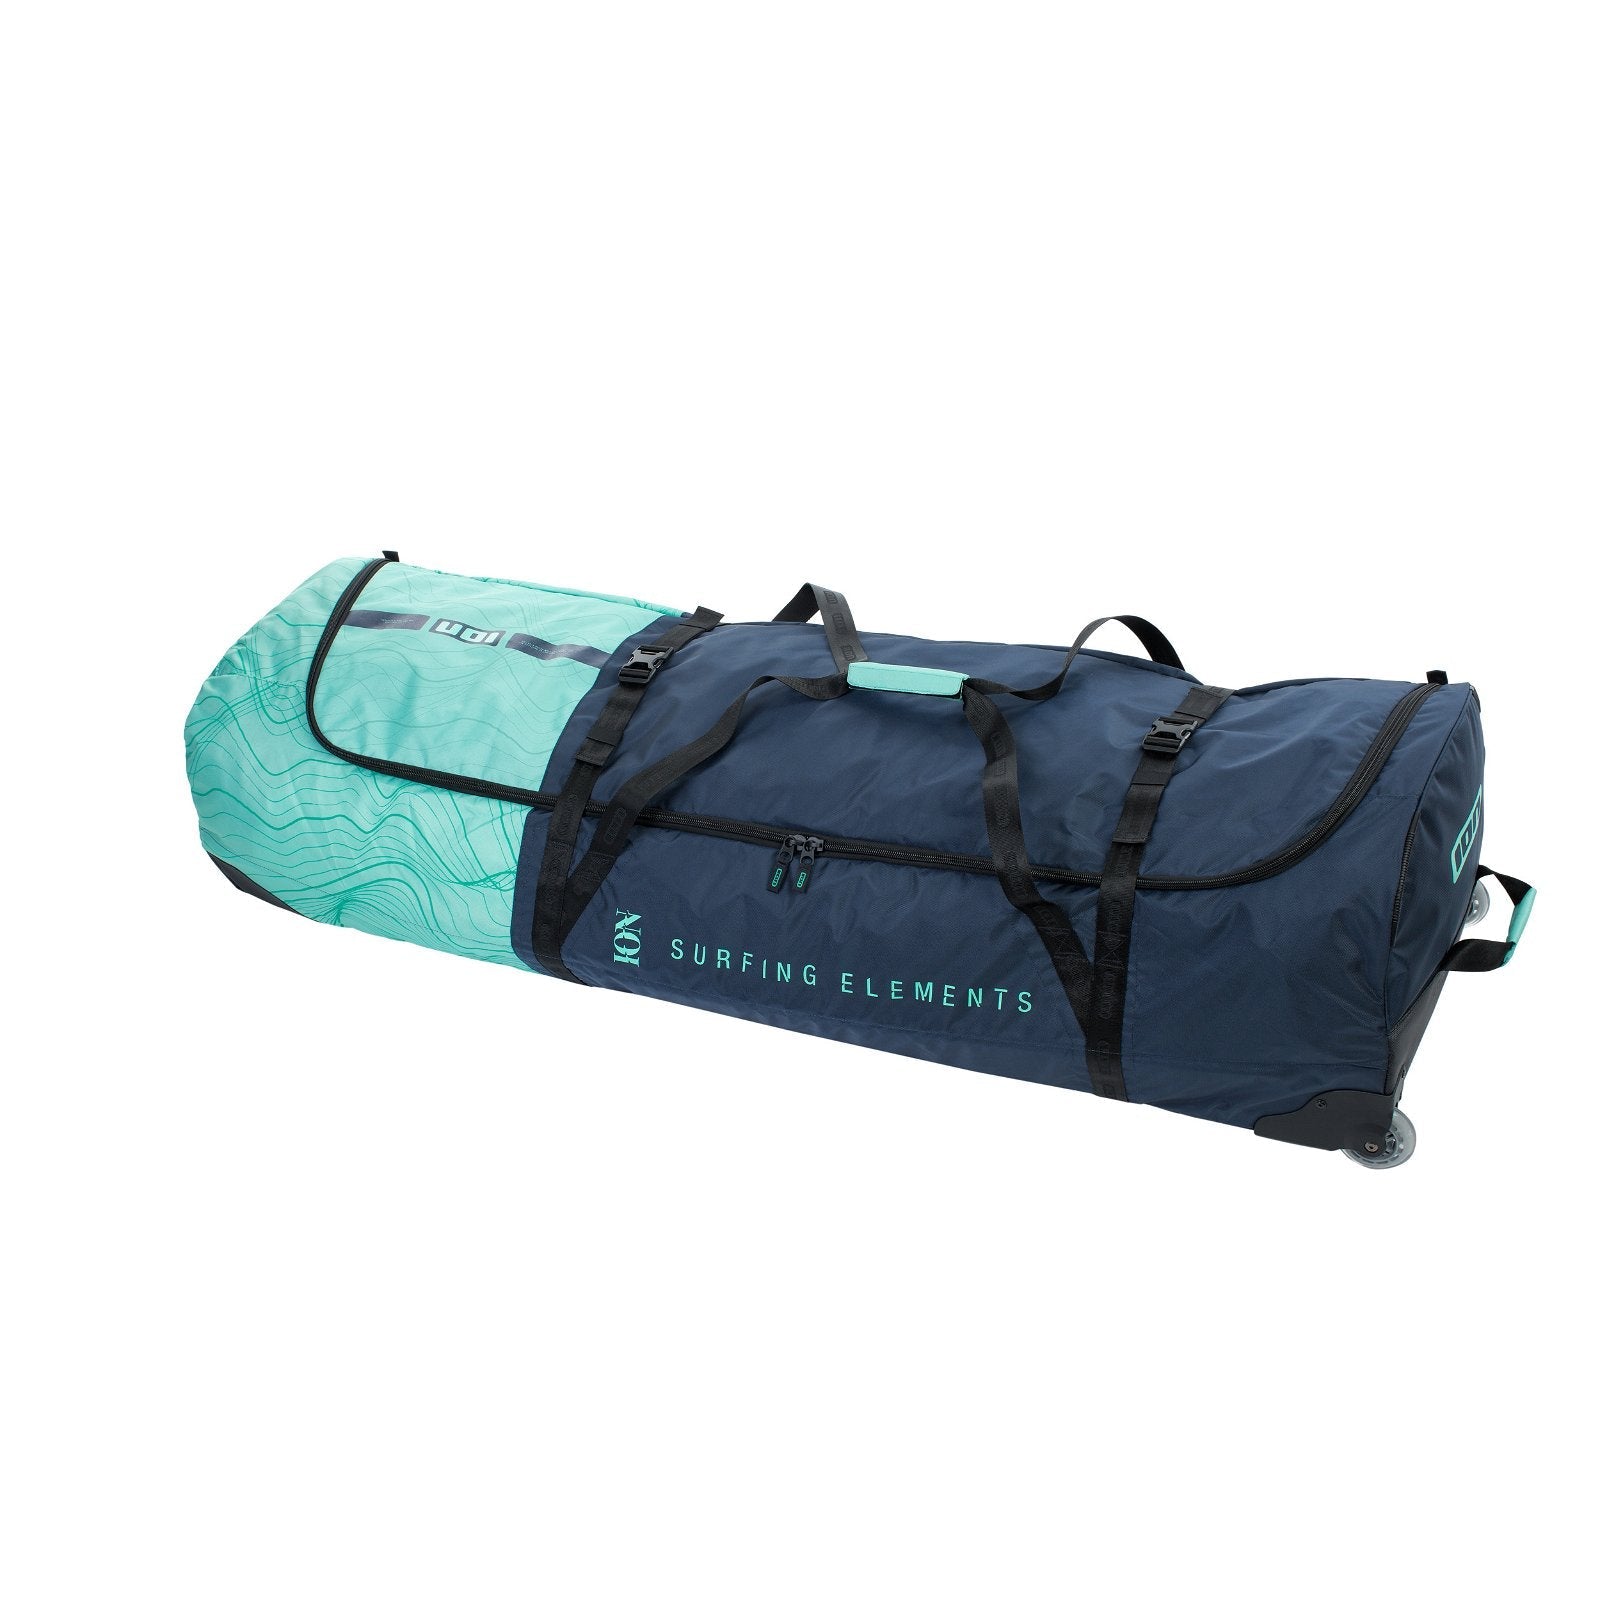 ION Gearbag Core 2023-ION Water-139-steel grey-48210-7018-9008415959884-Surf-store.com